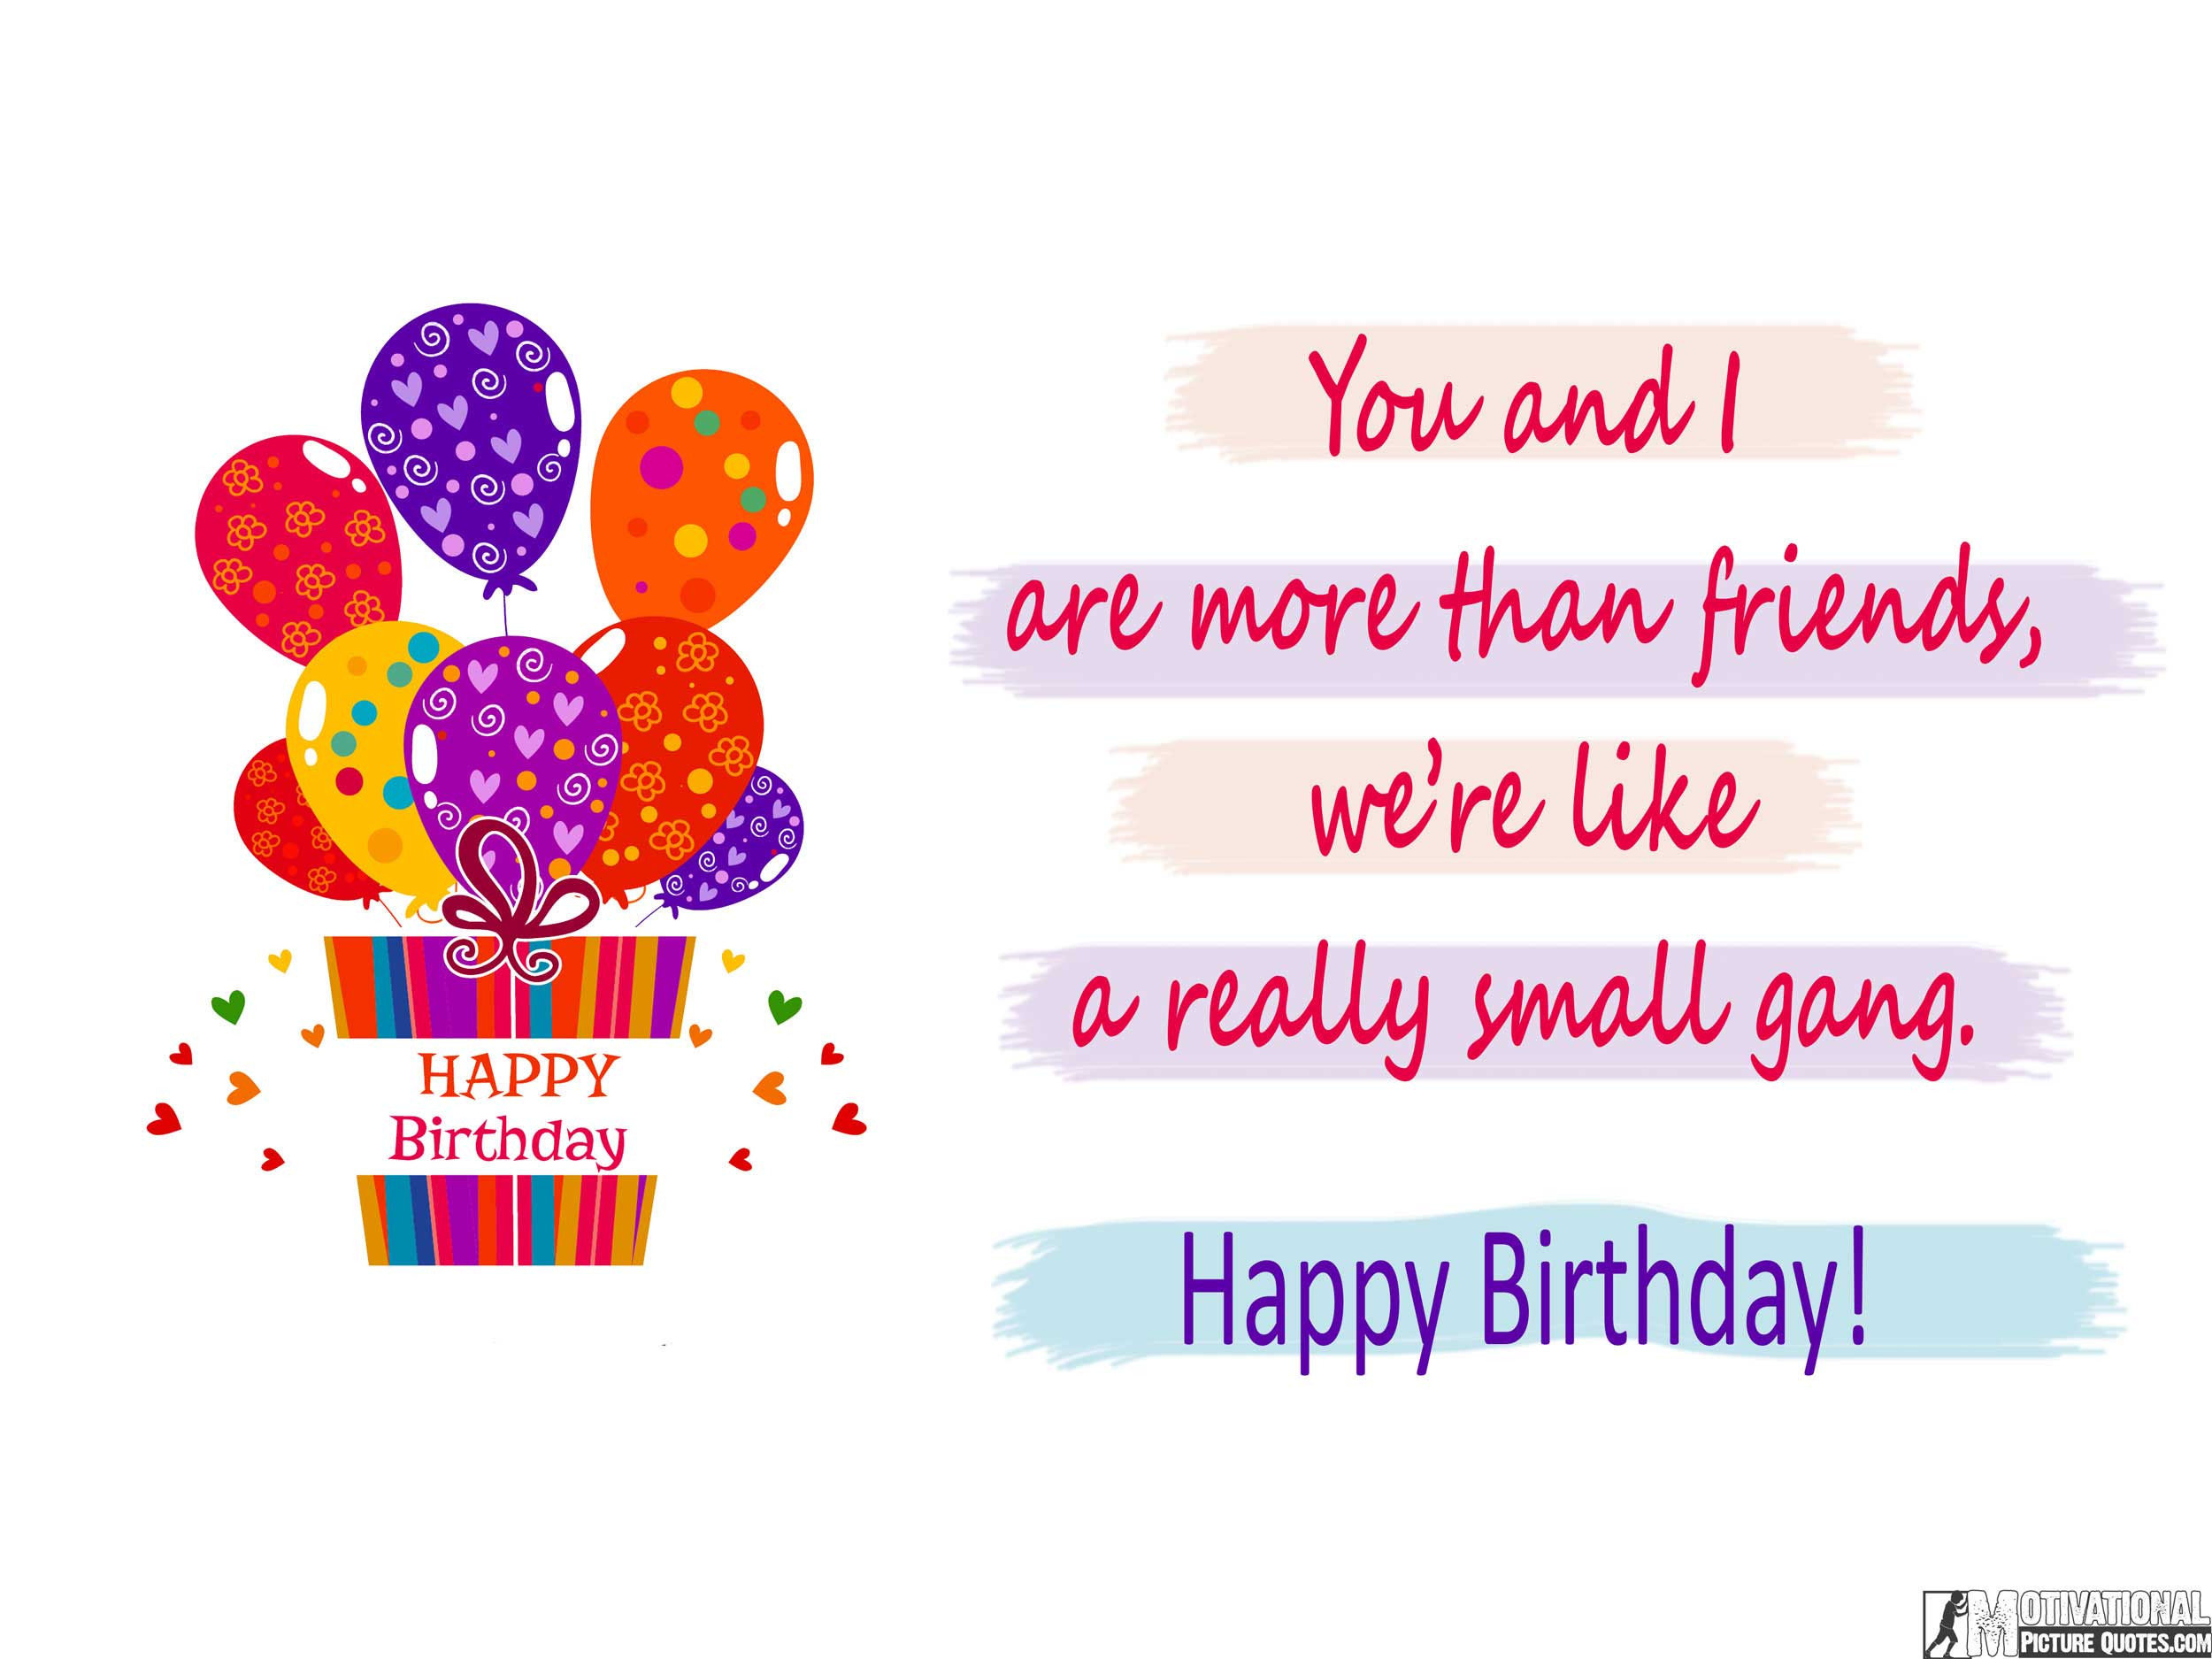 Quotes For A Friends Birthday
 35 Inspirational Birthday Quotes